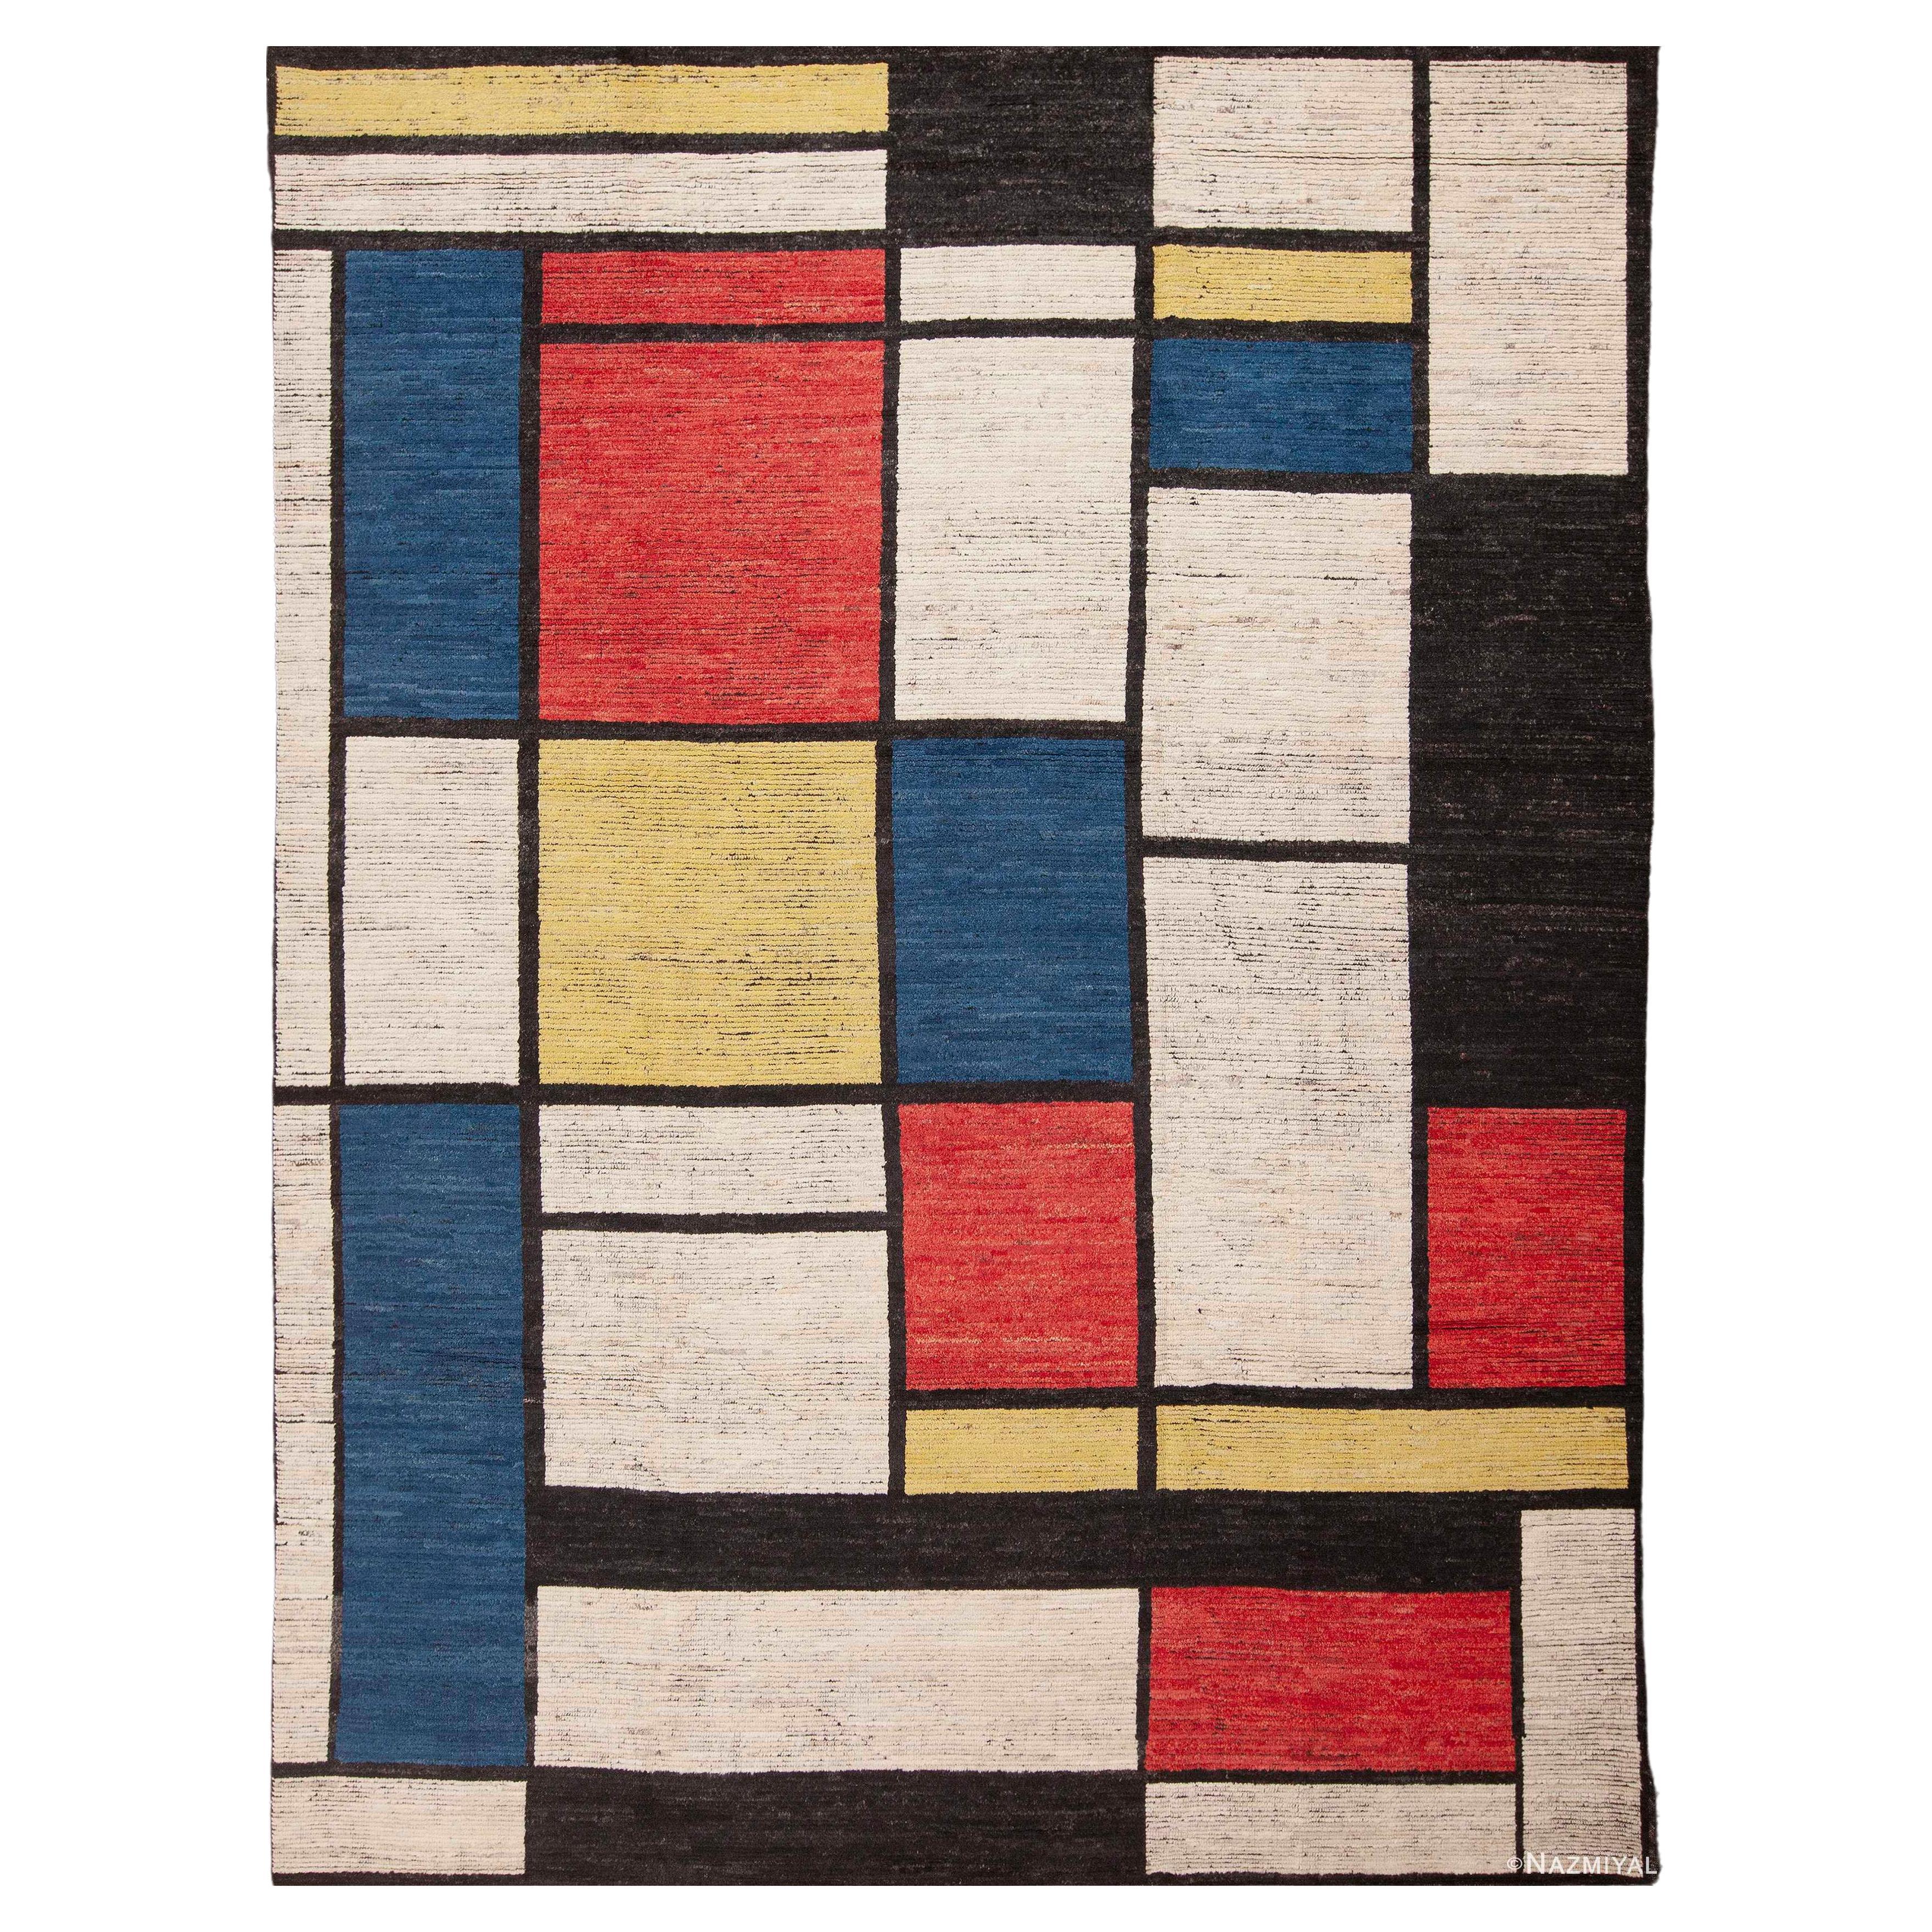 Nazmiyal Collection Modern Piet Mondrian Design Room Size Area Rug 9'5" x 12'5" For Sale